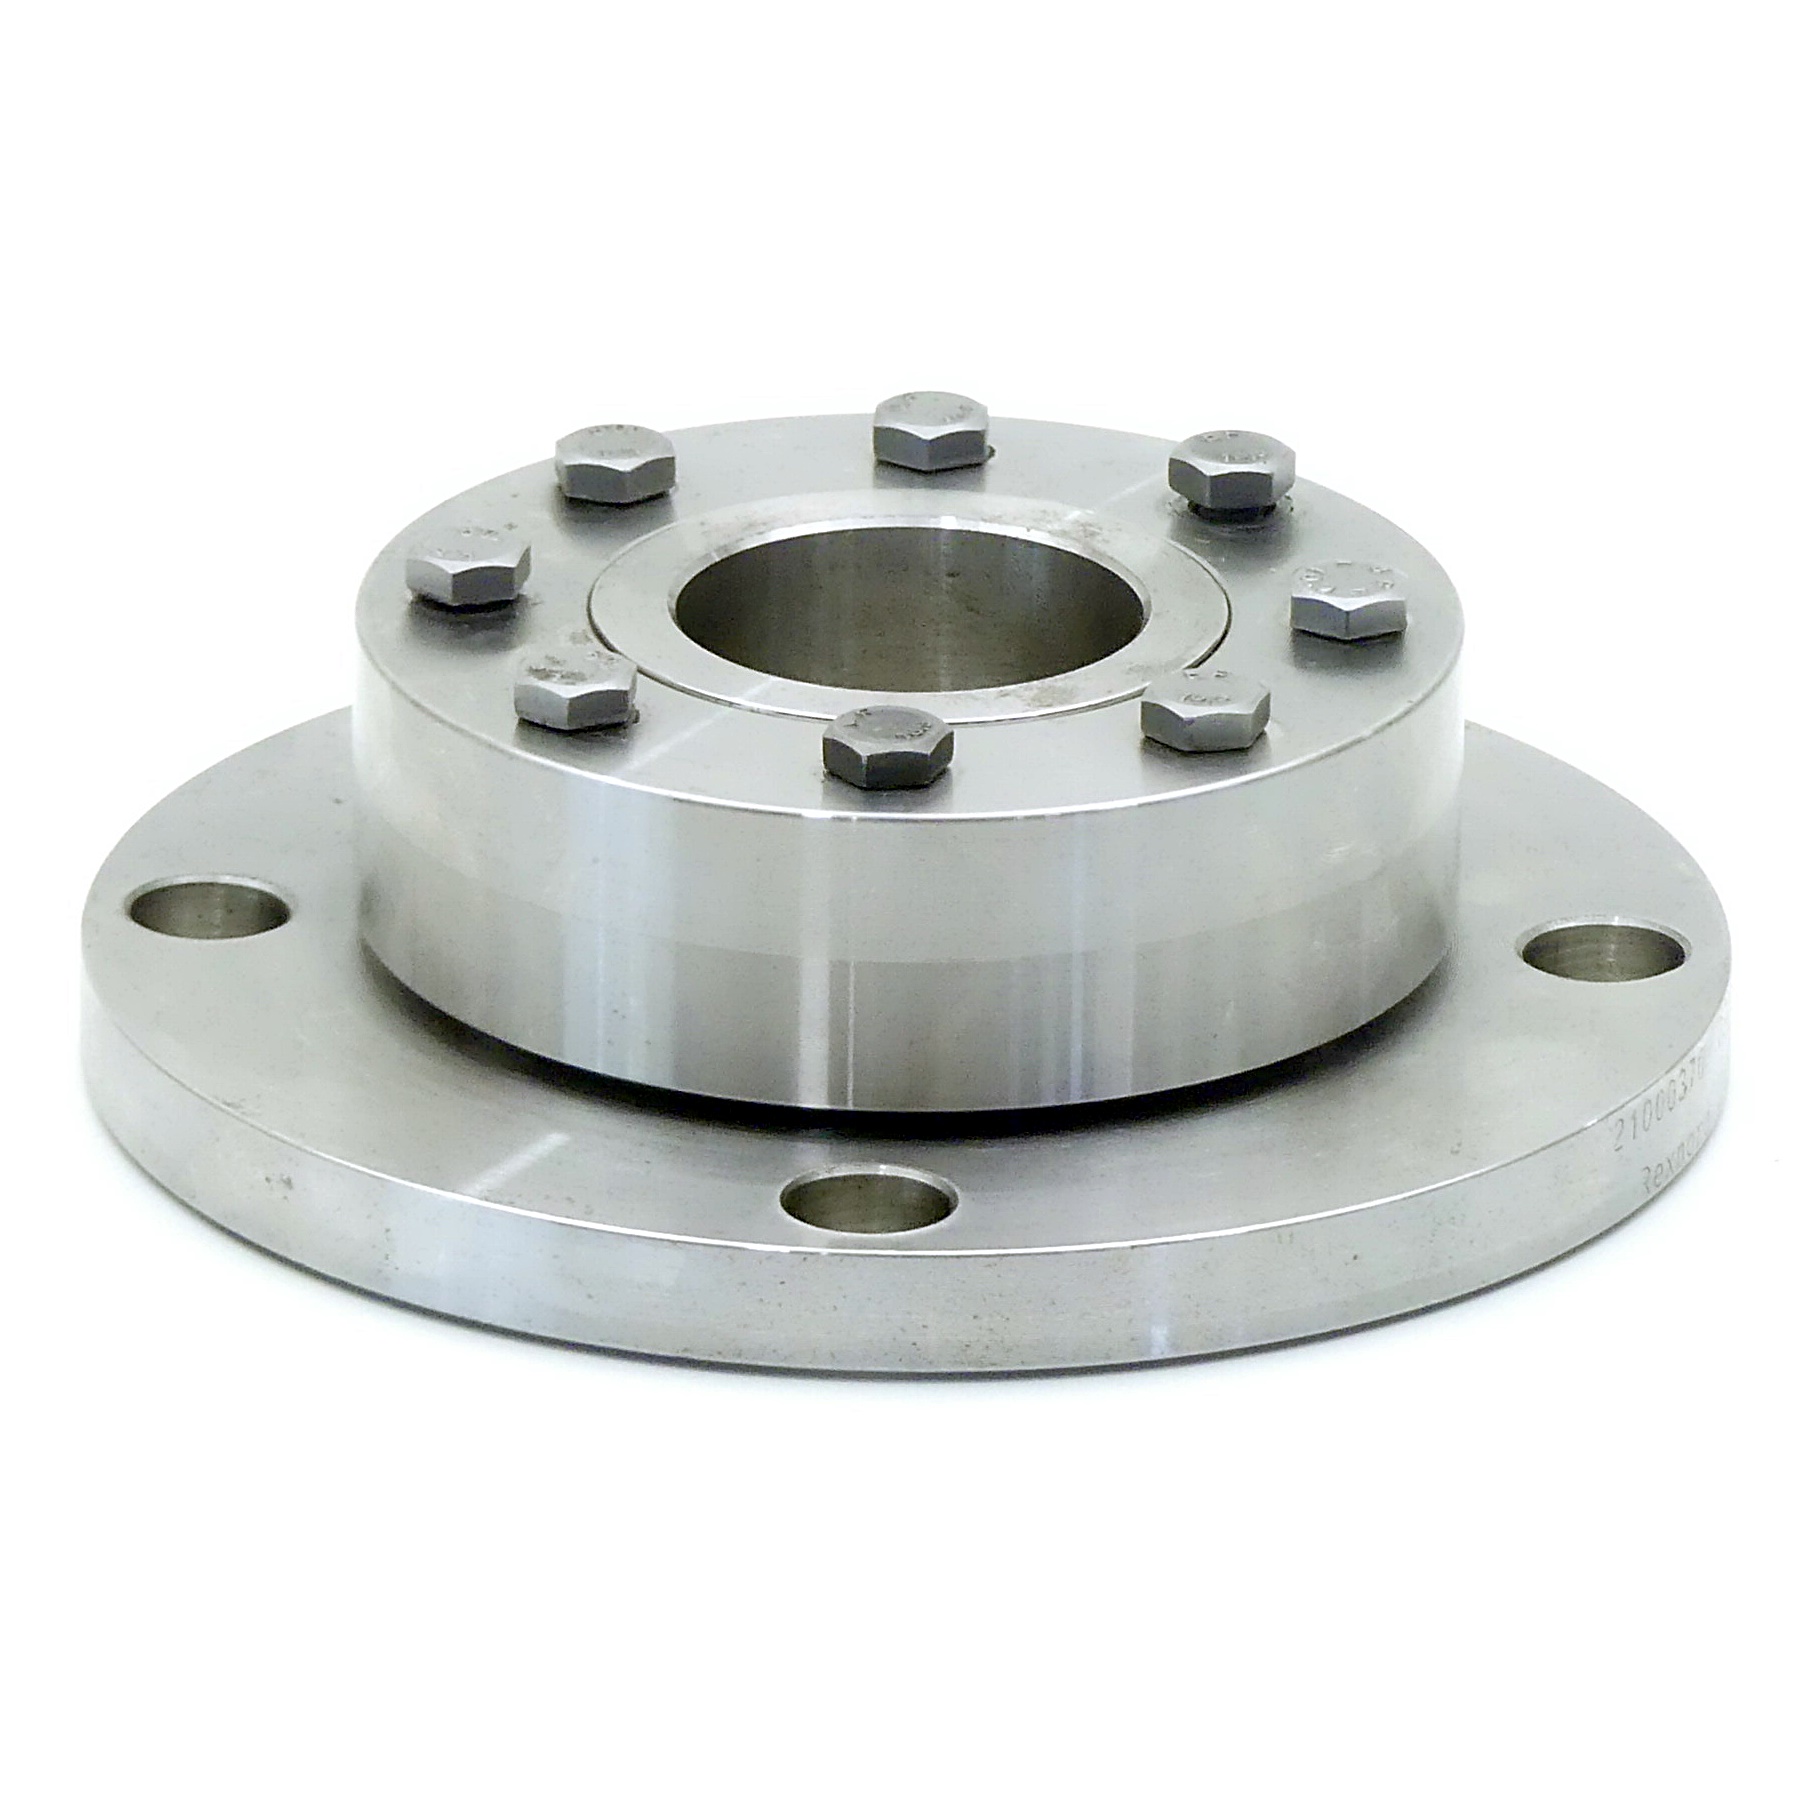 Clamping flange 21000370 